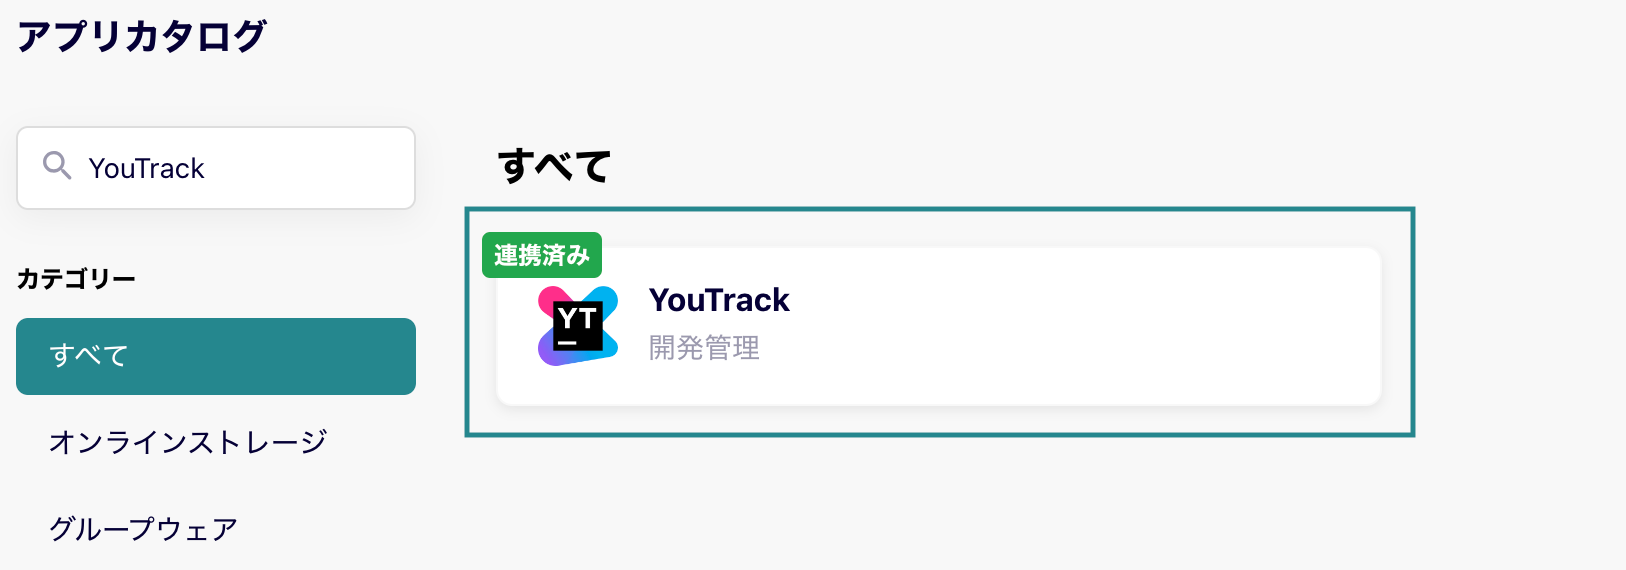 youtrack01.png